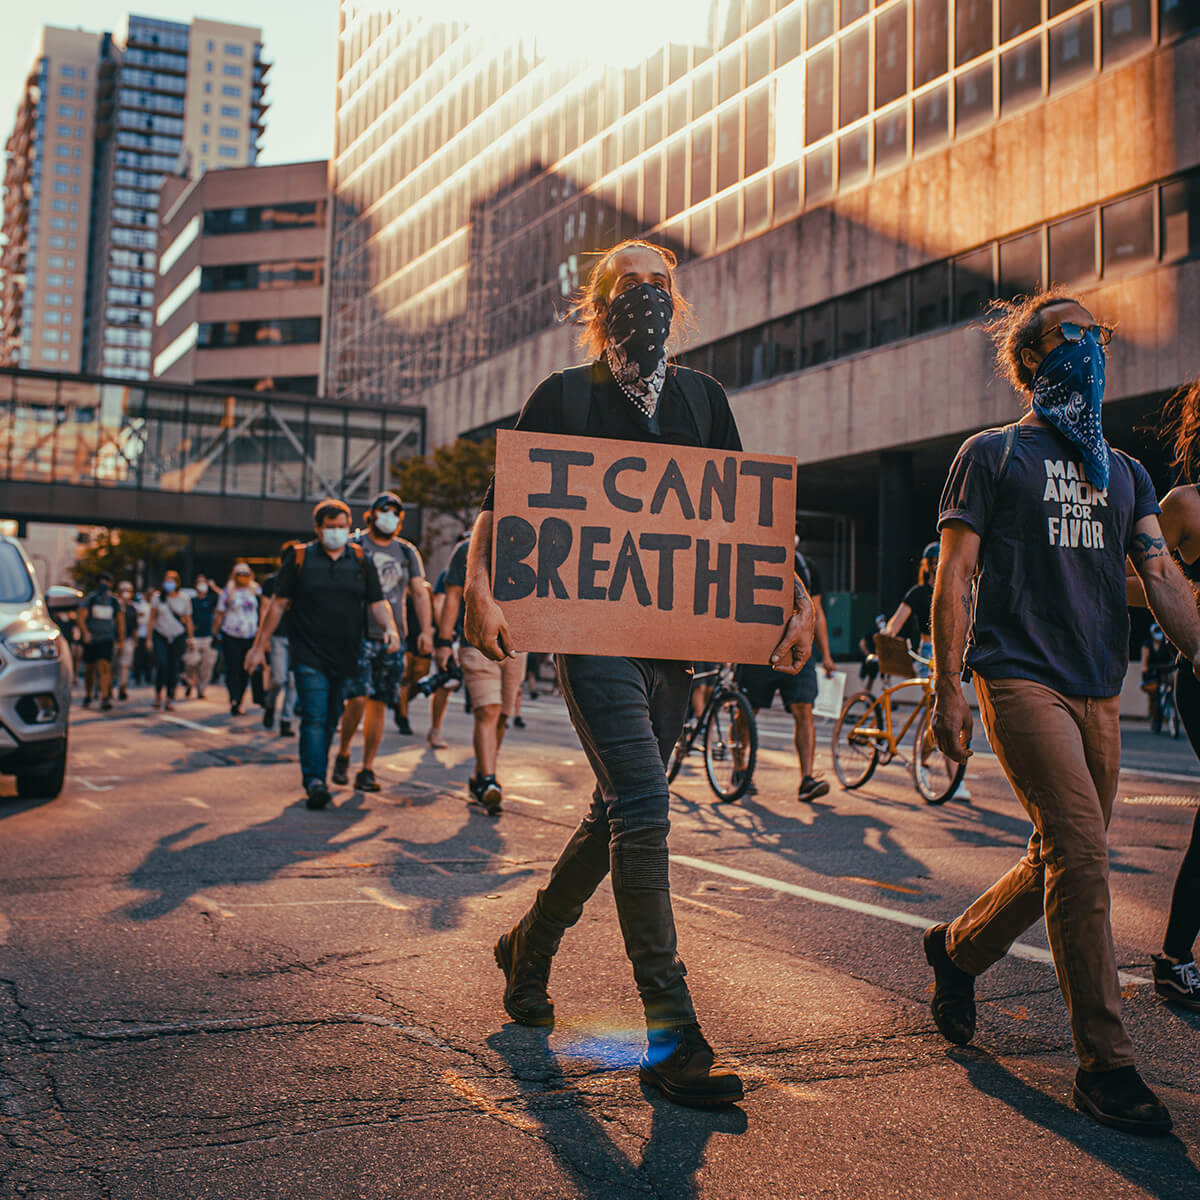 I can't breathe sign protest